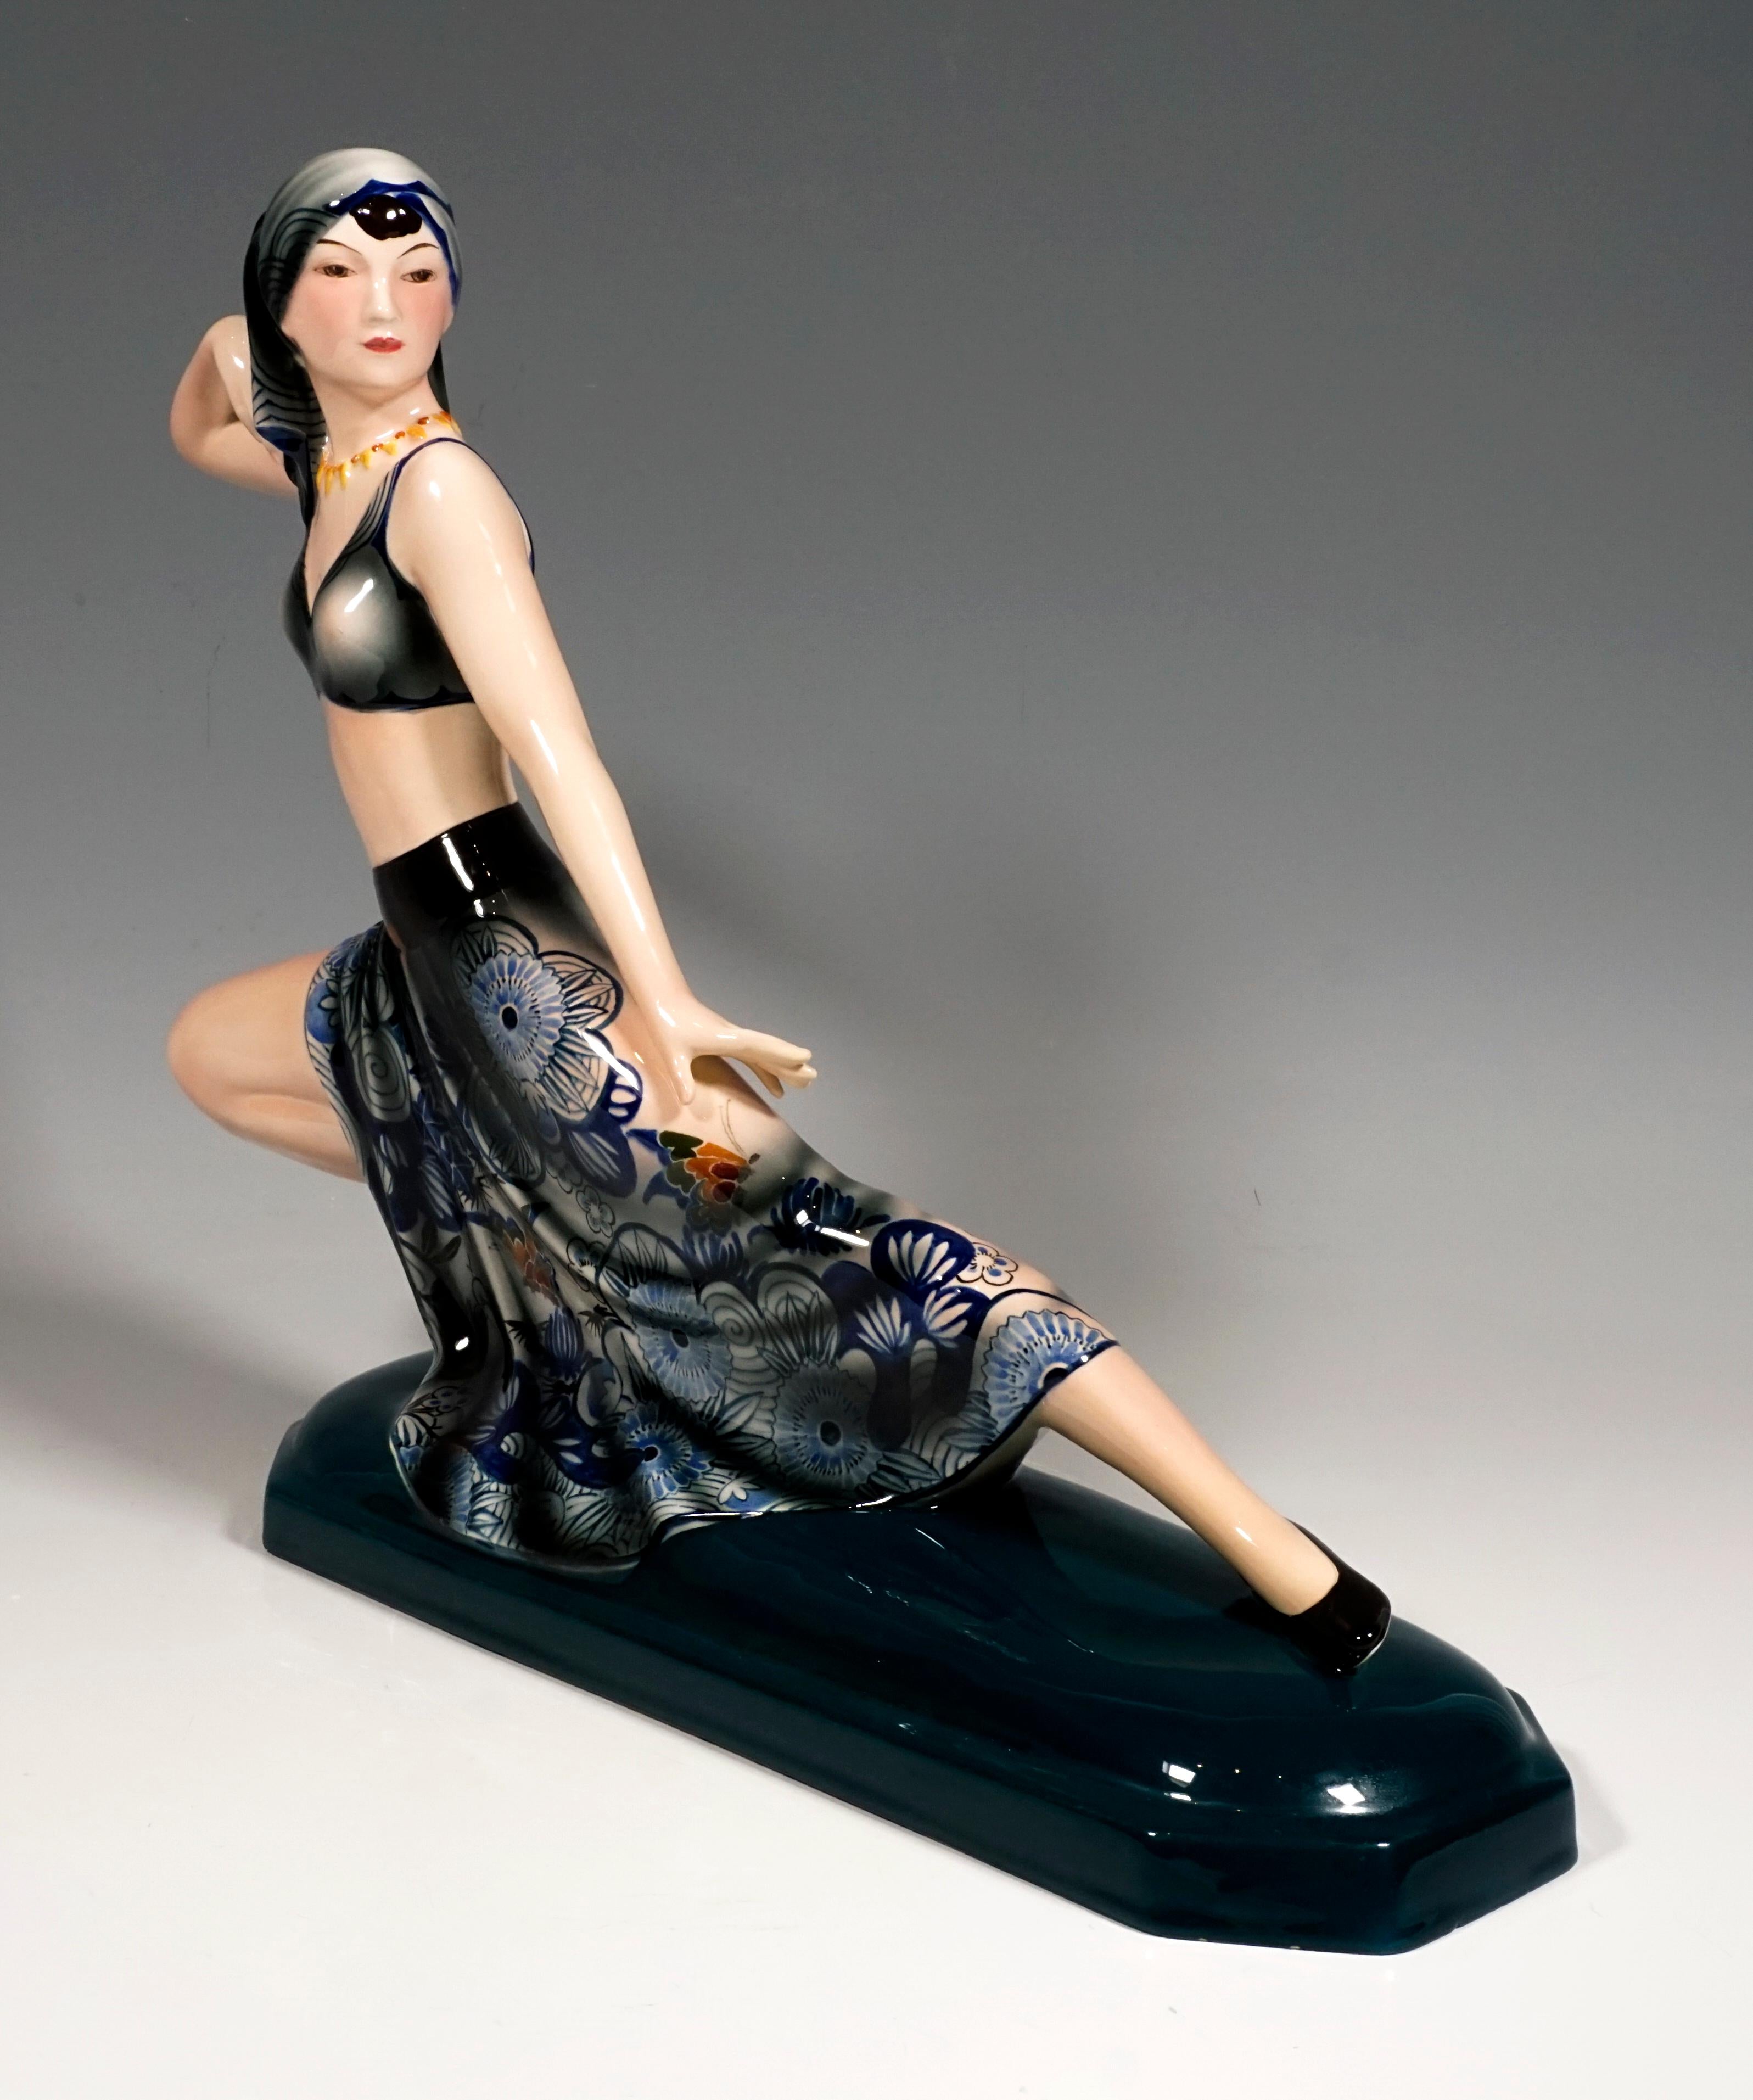 Rare Goldscheider Figurine of the 1930s

The dancer has her hair covered with a headscarf and is wearing a bustier and a long, wide skirt with blue flowers and colorful butterflies. With her head turned to the left, her right arm raised behind her